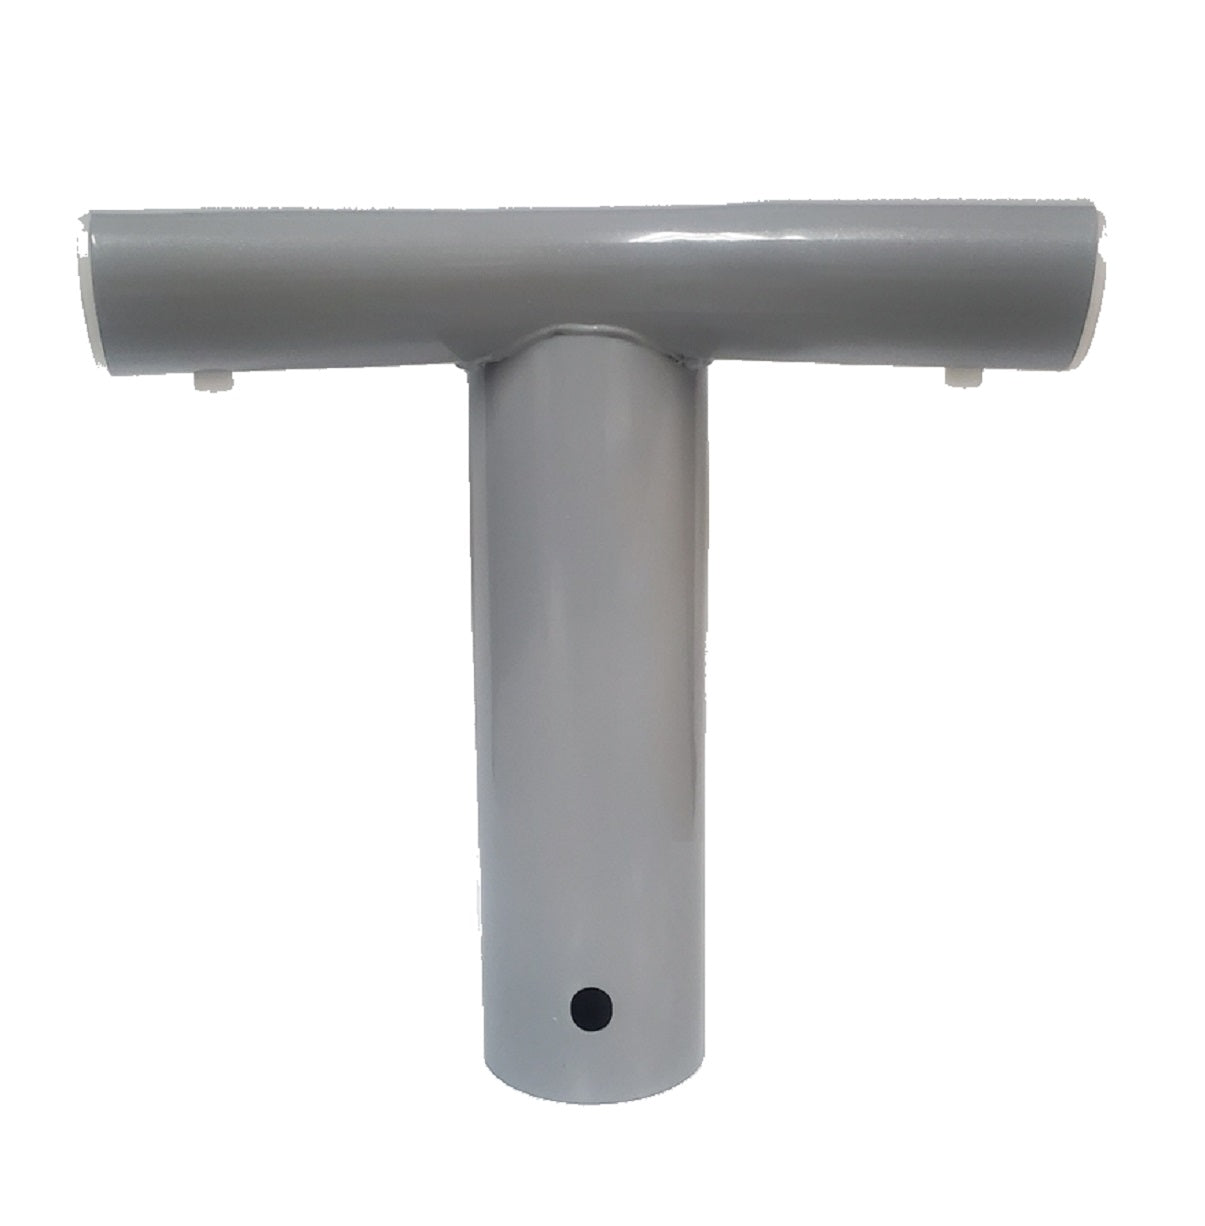 Replacement 11450 Intex Leg & Beam T-Joint for Ultra Frame Pools (Metal T-Joint)